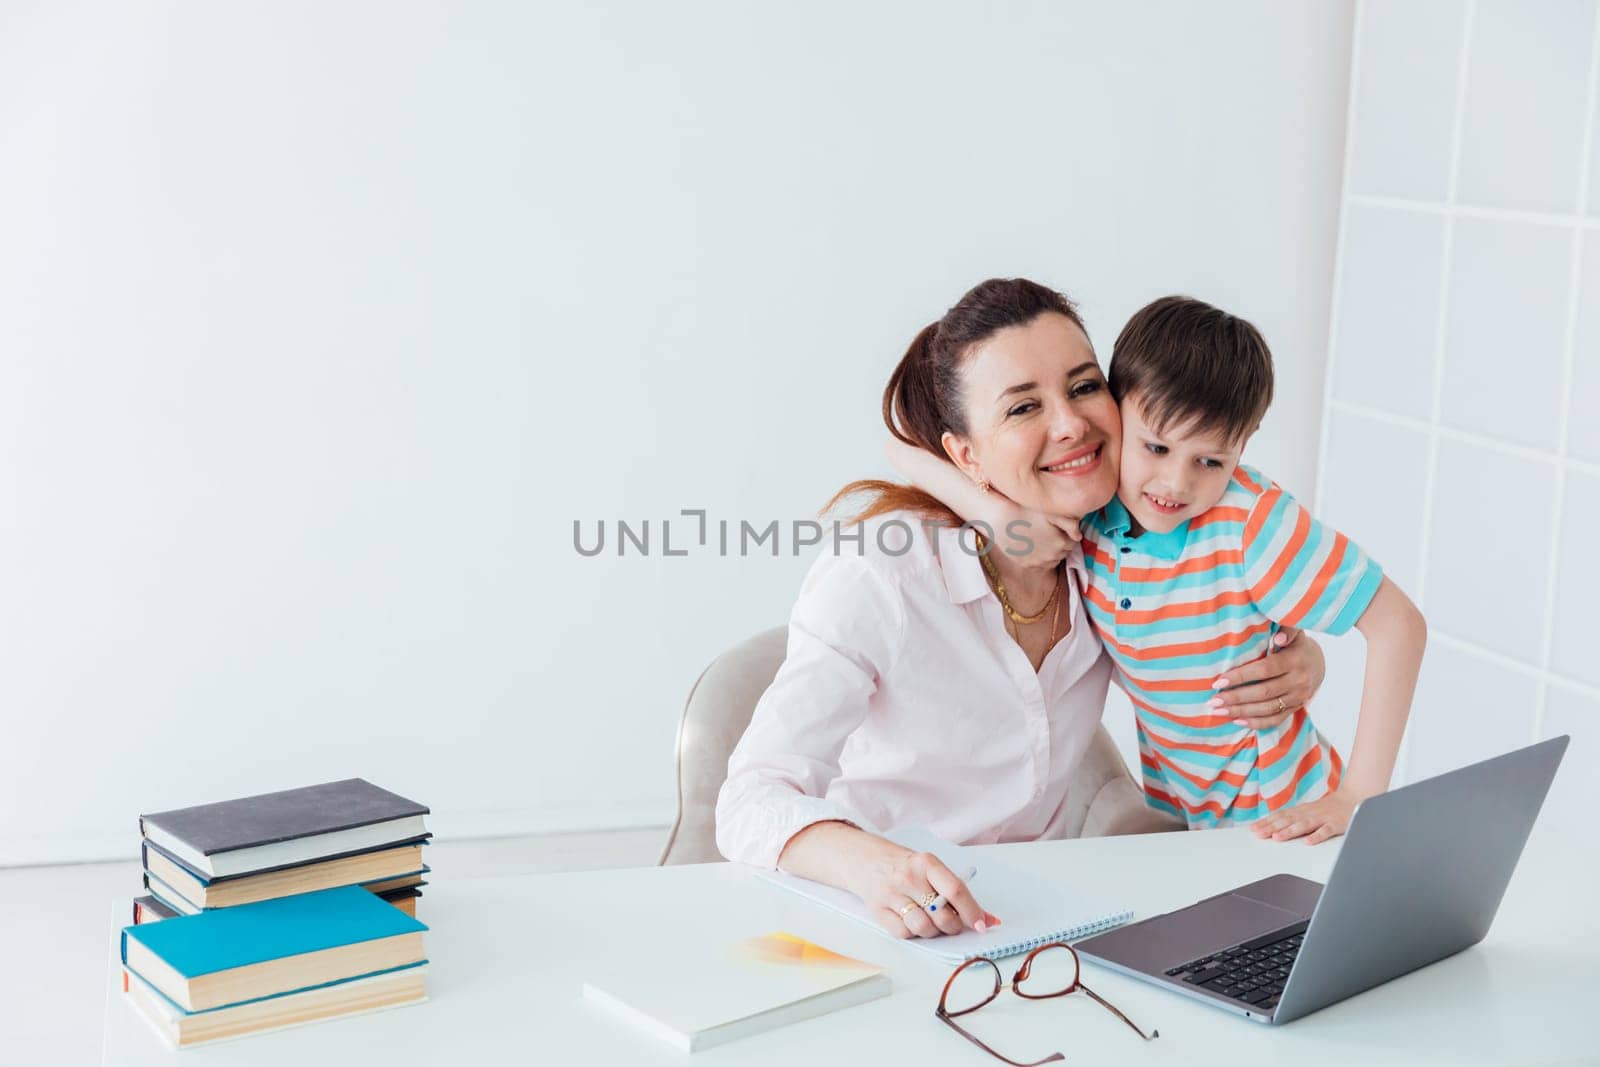 Woman with boy playing laptop